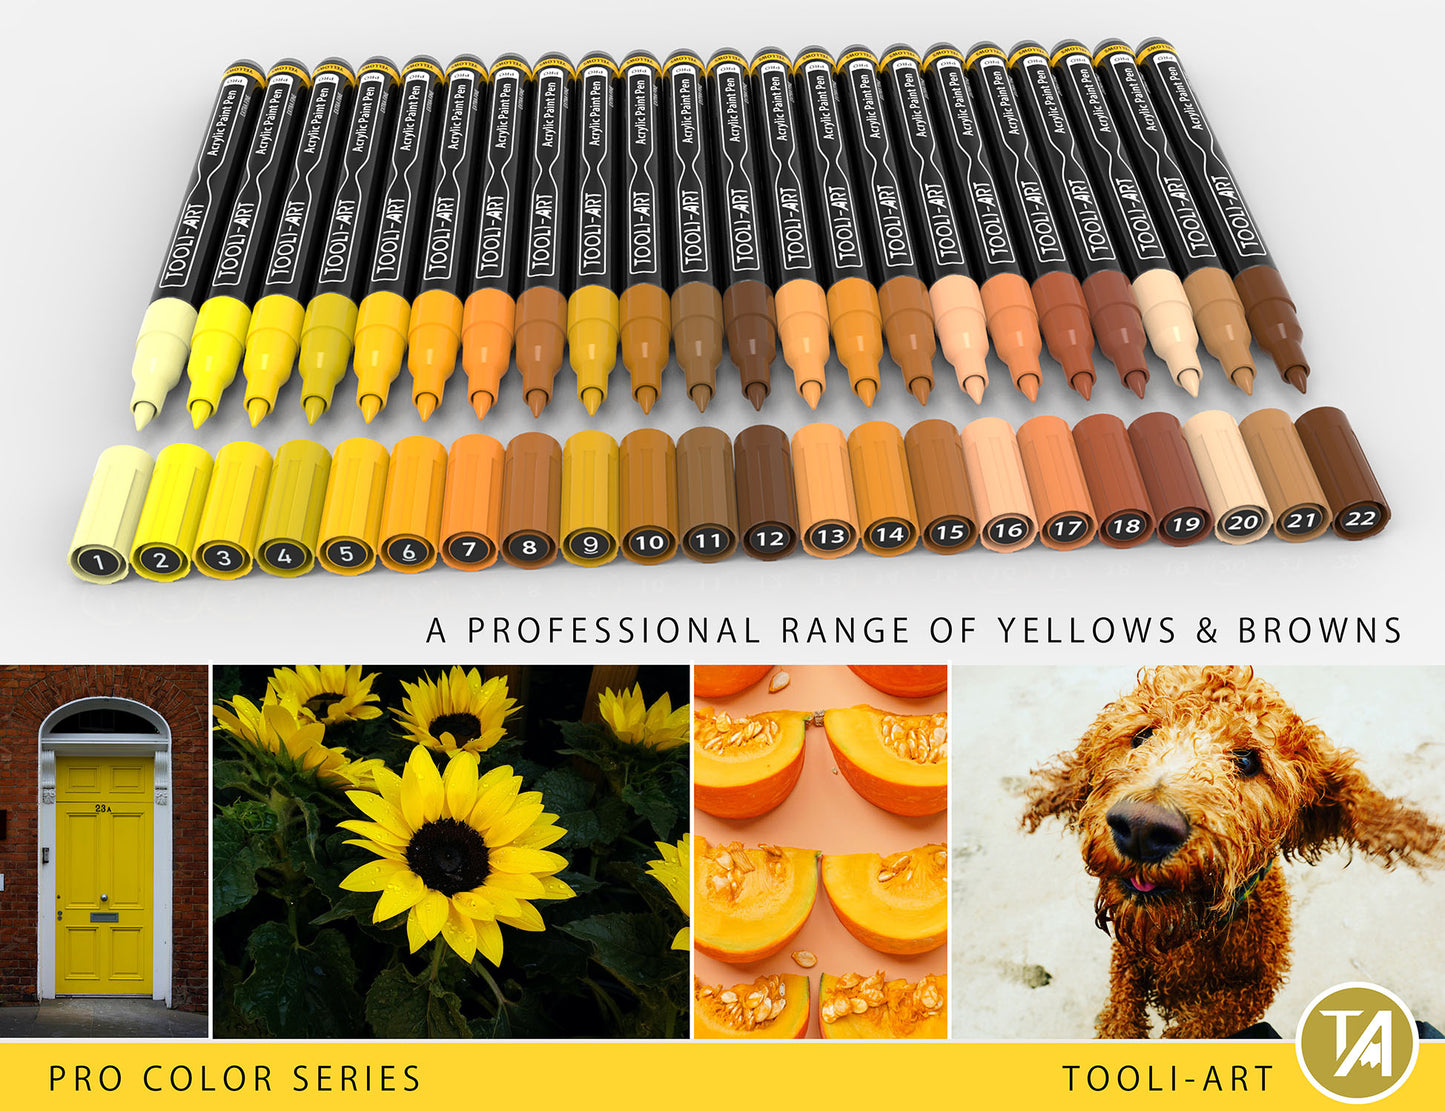 Acrylic Paint Pens 22 Assorted Yellow & Browns Pro Color Series Specialty Markers Set (0.7mm EXTRA FINE)